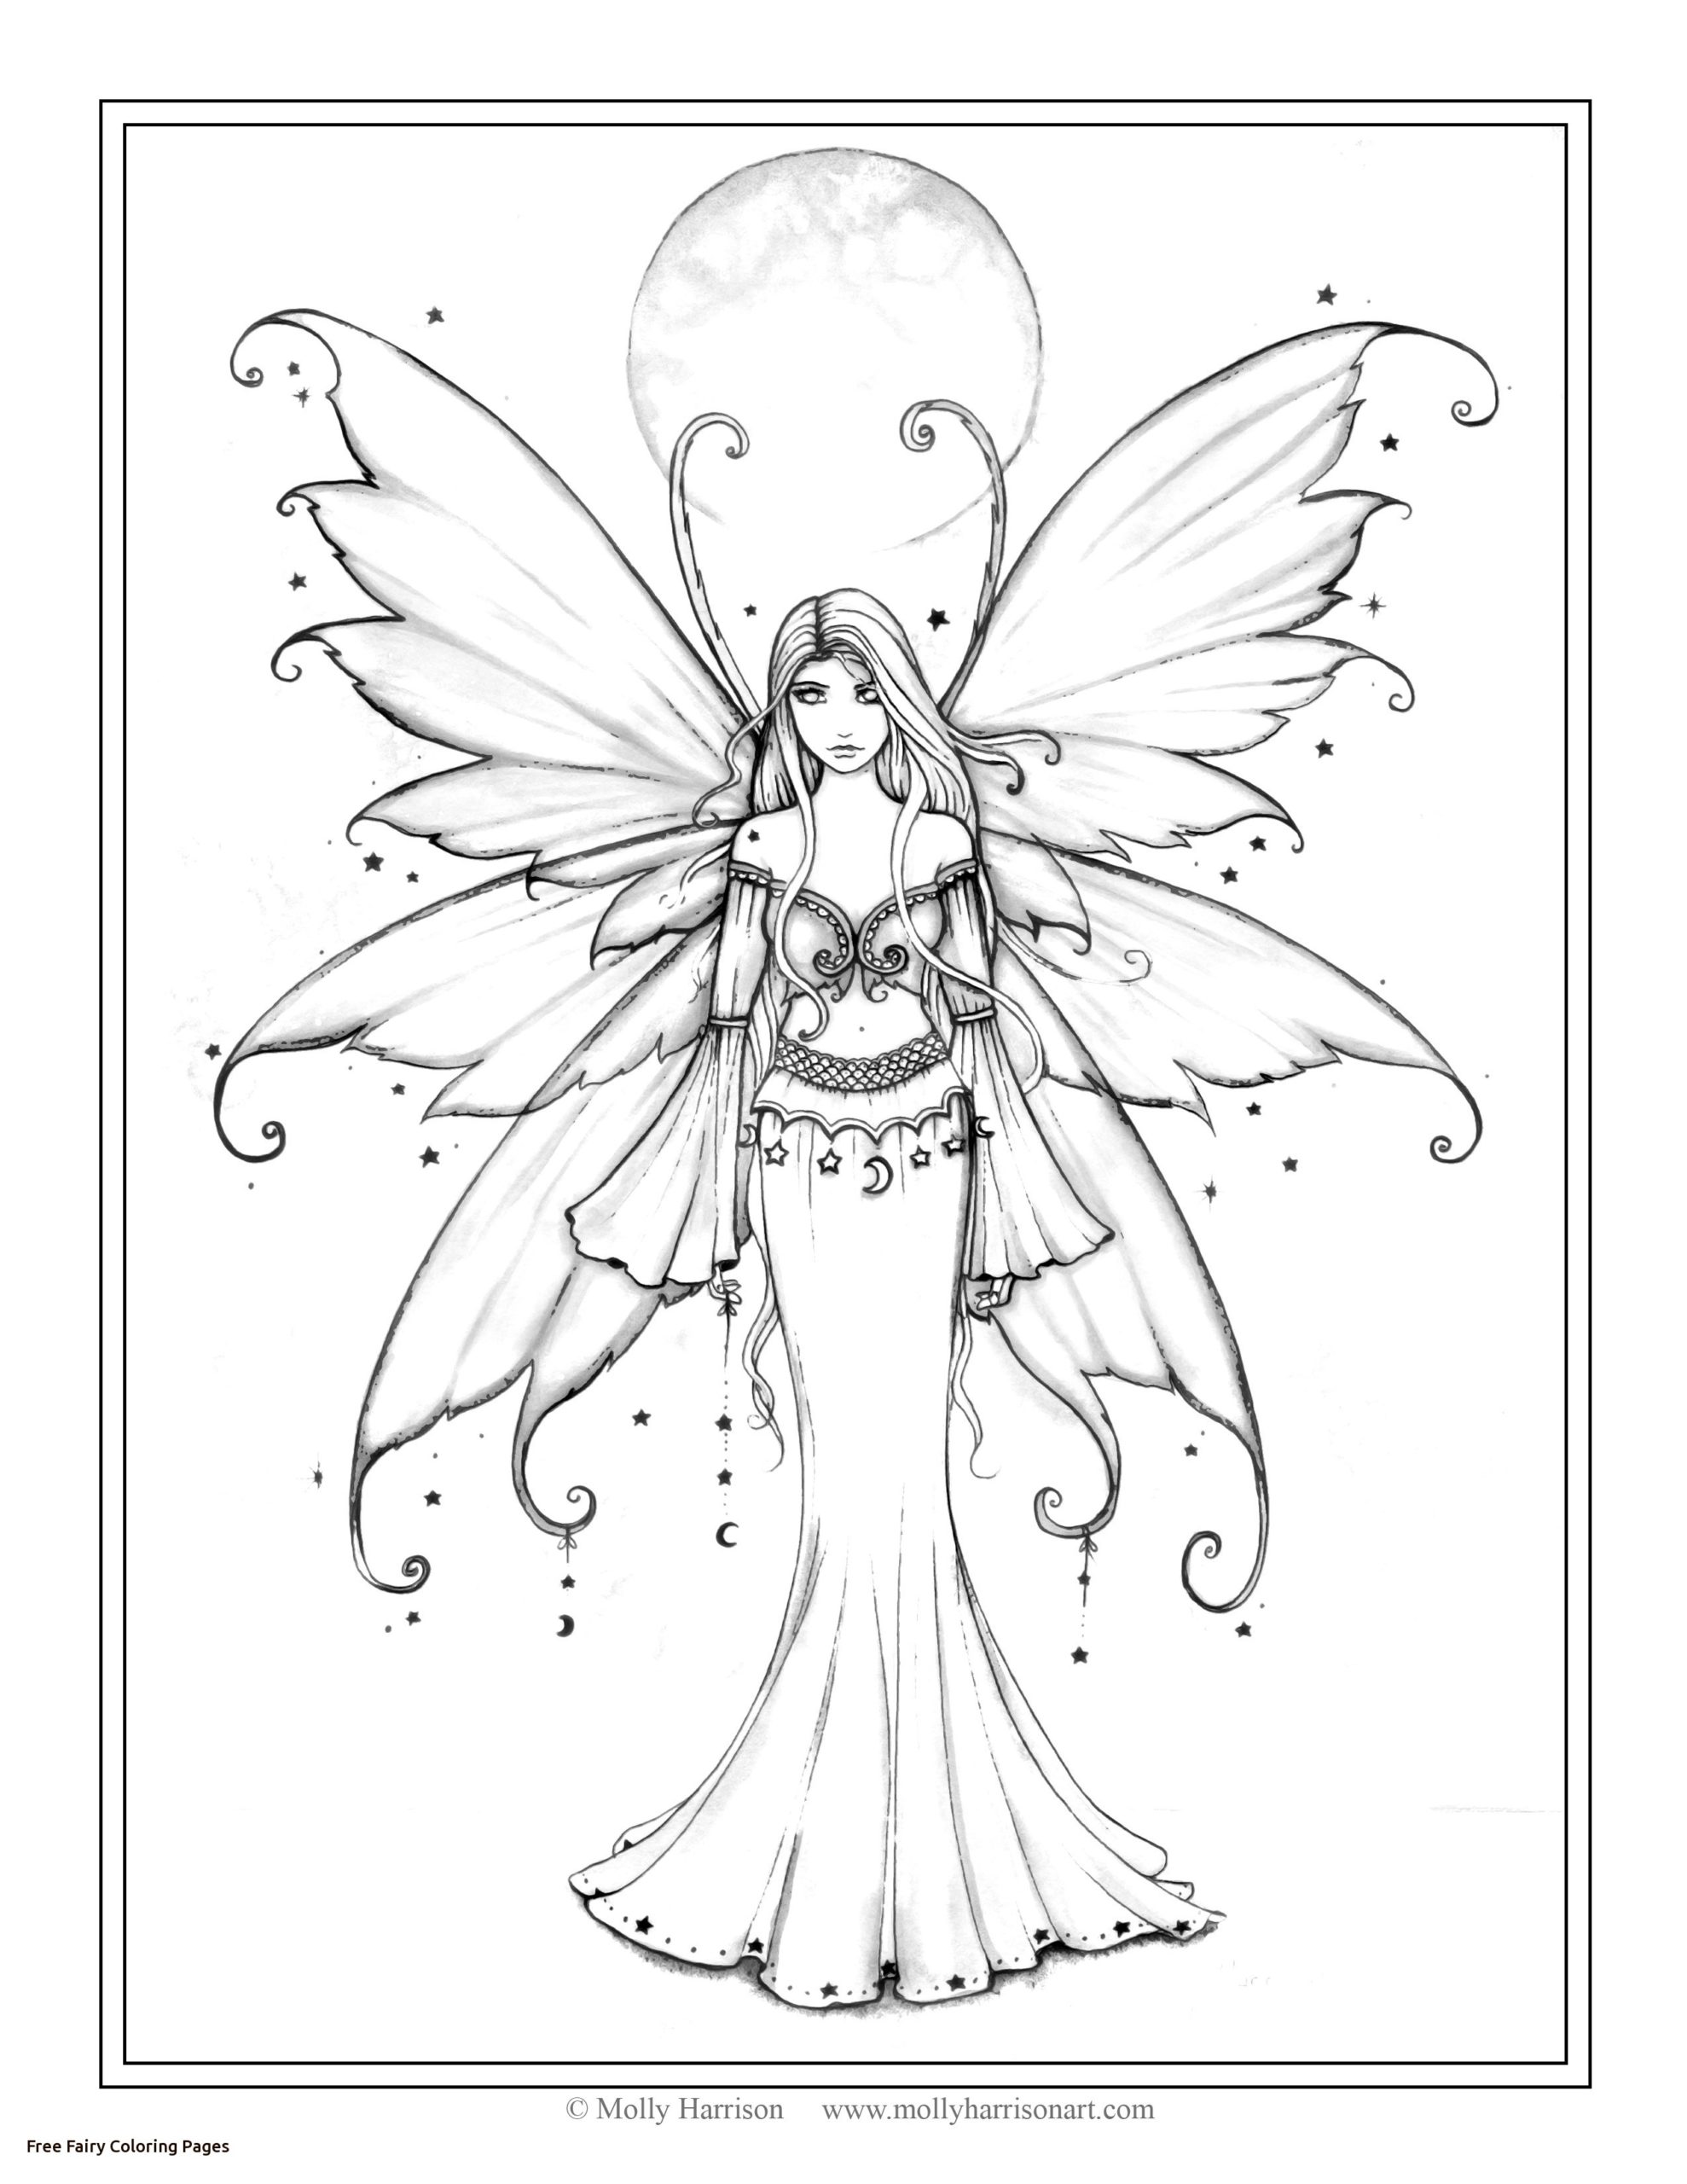 Coloring Pages : Coloring Pages Top Supreme Fantasy Fairy At ...